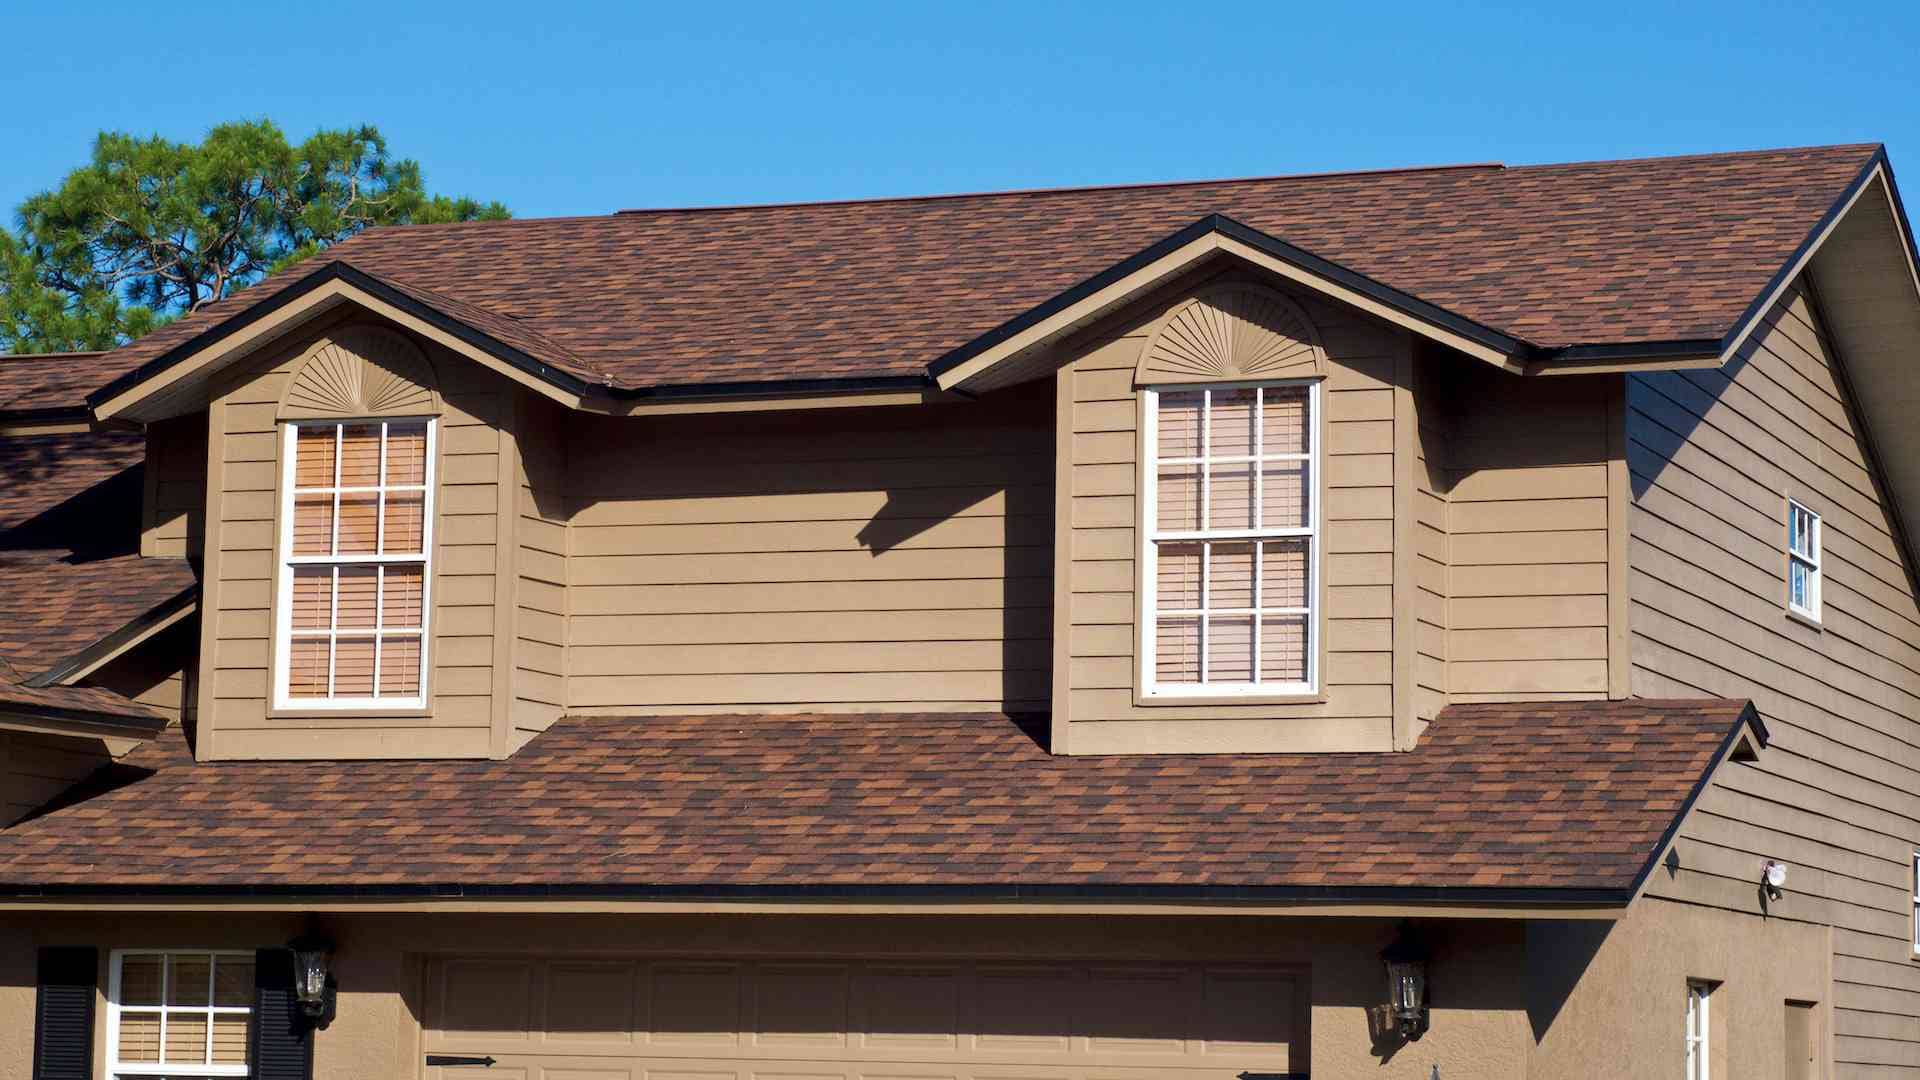 Beautiful brown house with high-quality dark brown asphalt shingles by American Home Contractors in Parsippany, NJ.